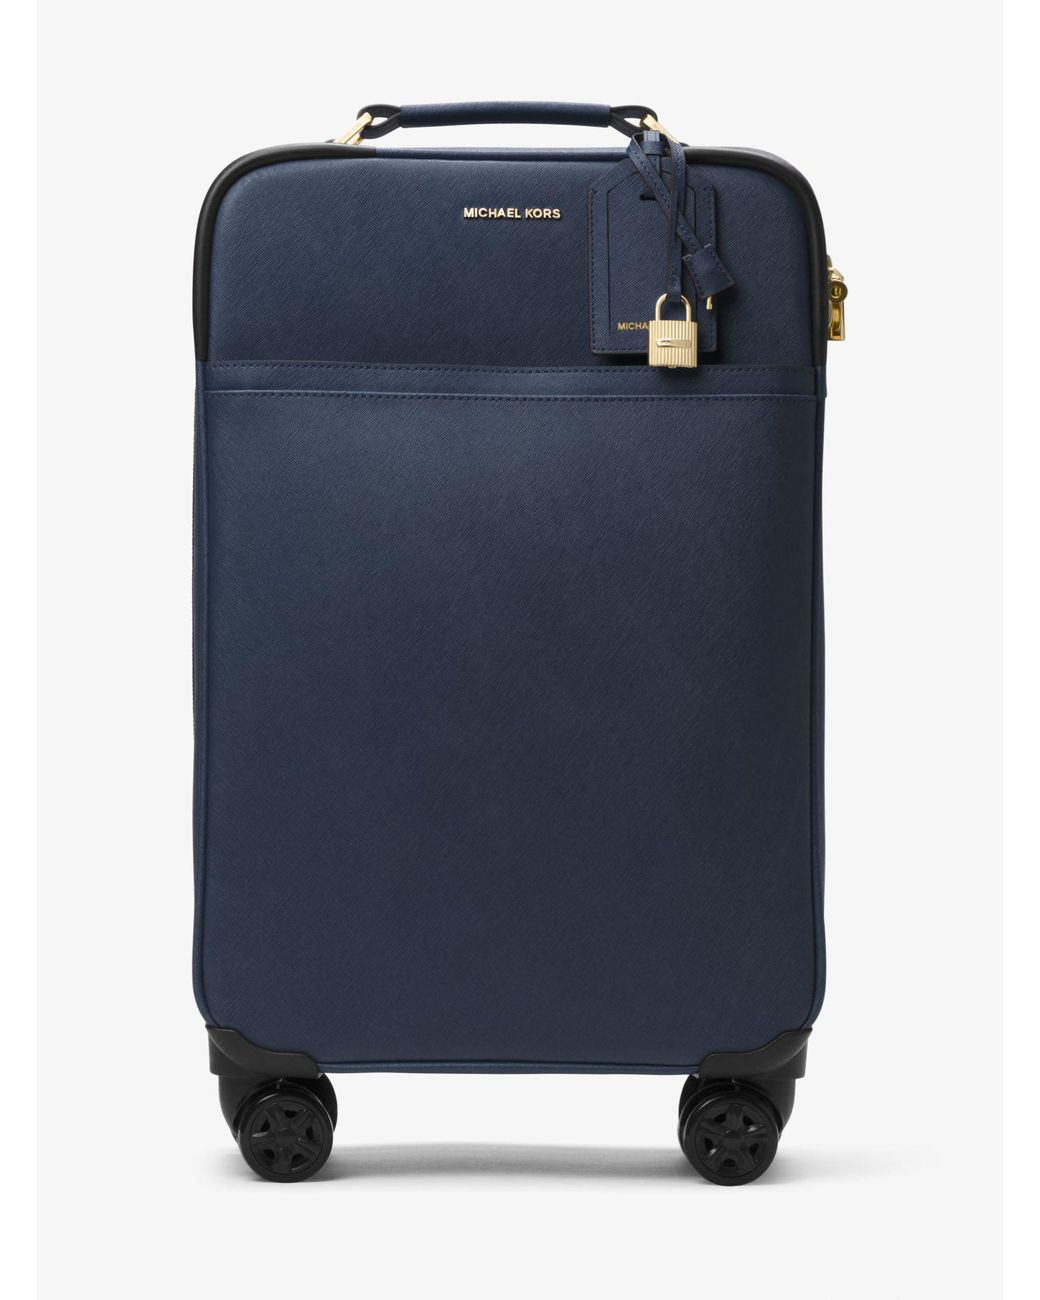 Michael Kors Large Saffiano Leather Suitcase in Blue - Lyst